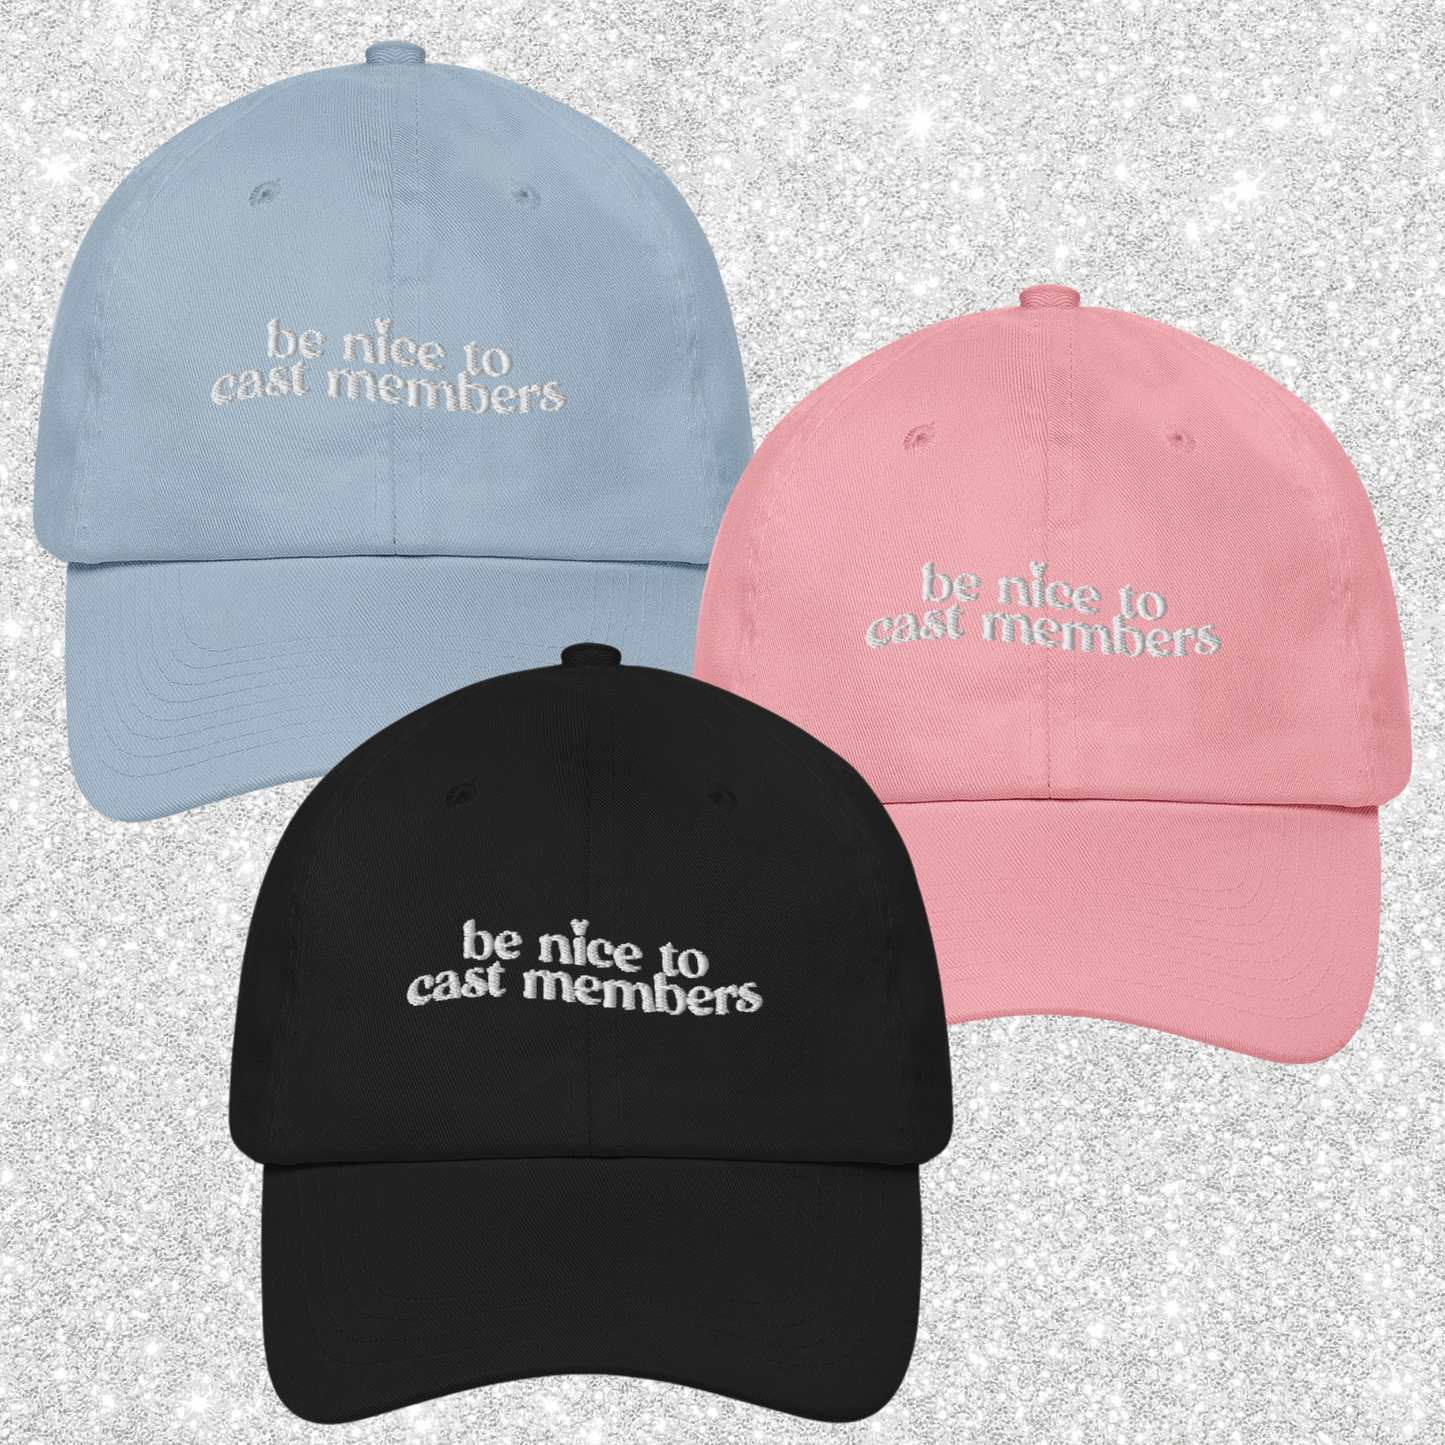 BE NICE TO CAST MEMBERS - DAD HAT